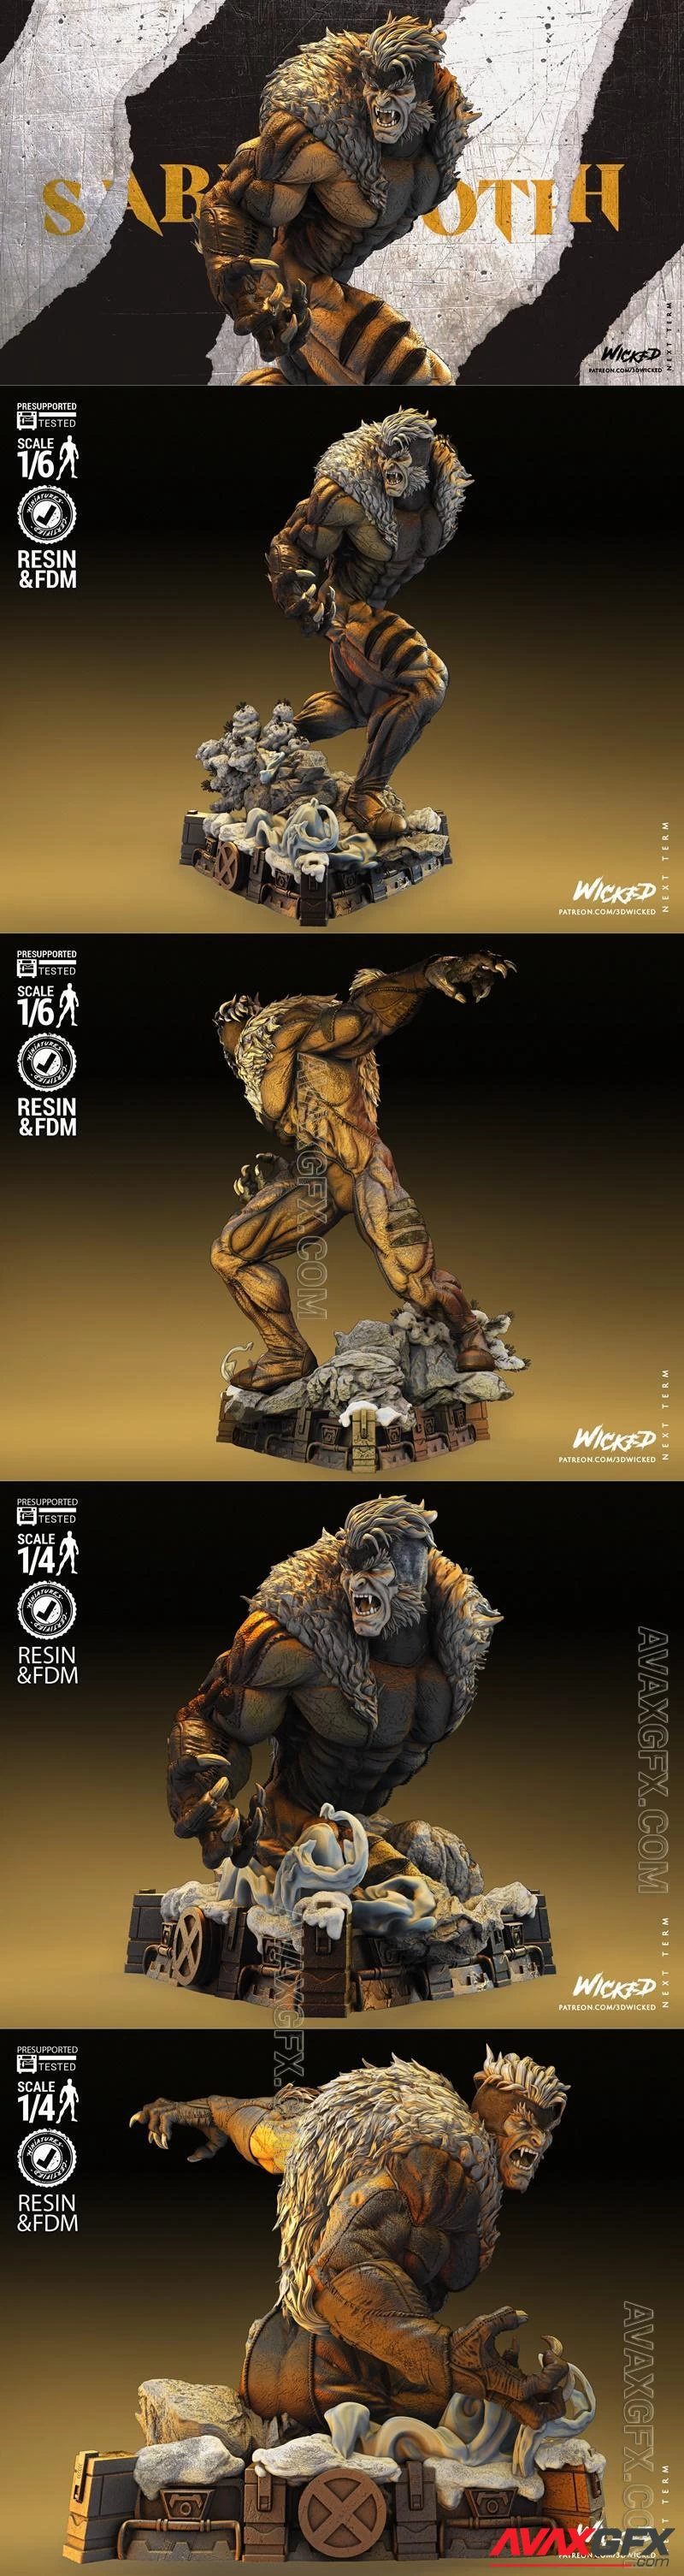 Wicked - SabreTooth Statue and Bust